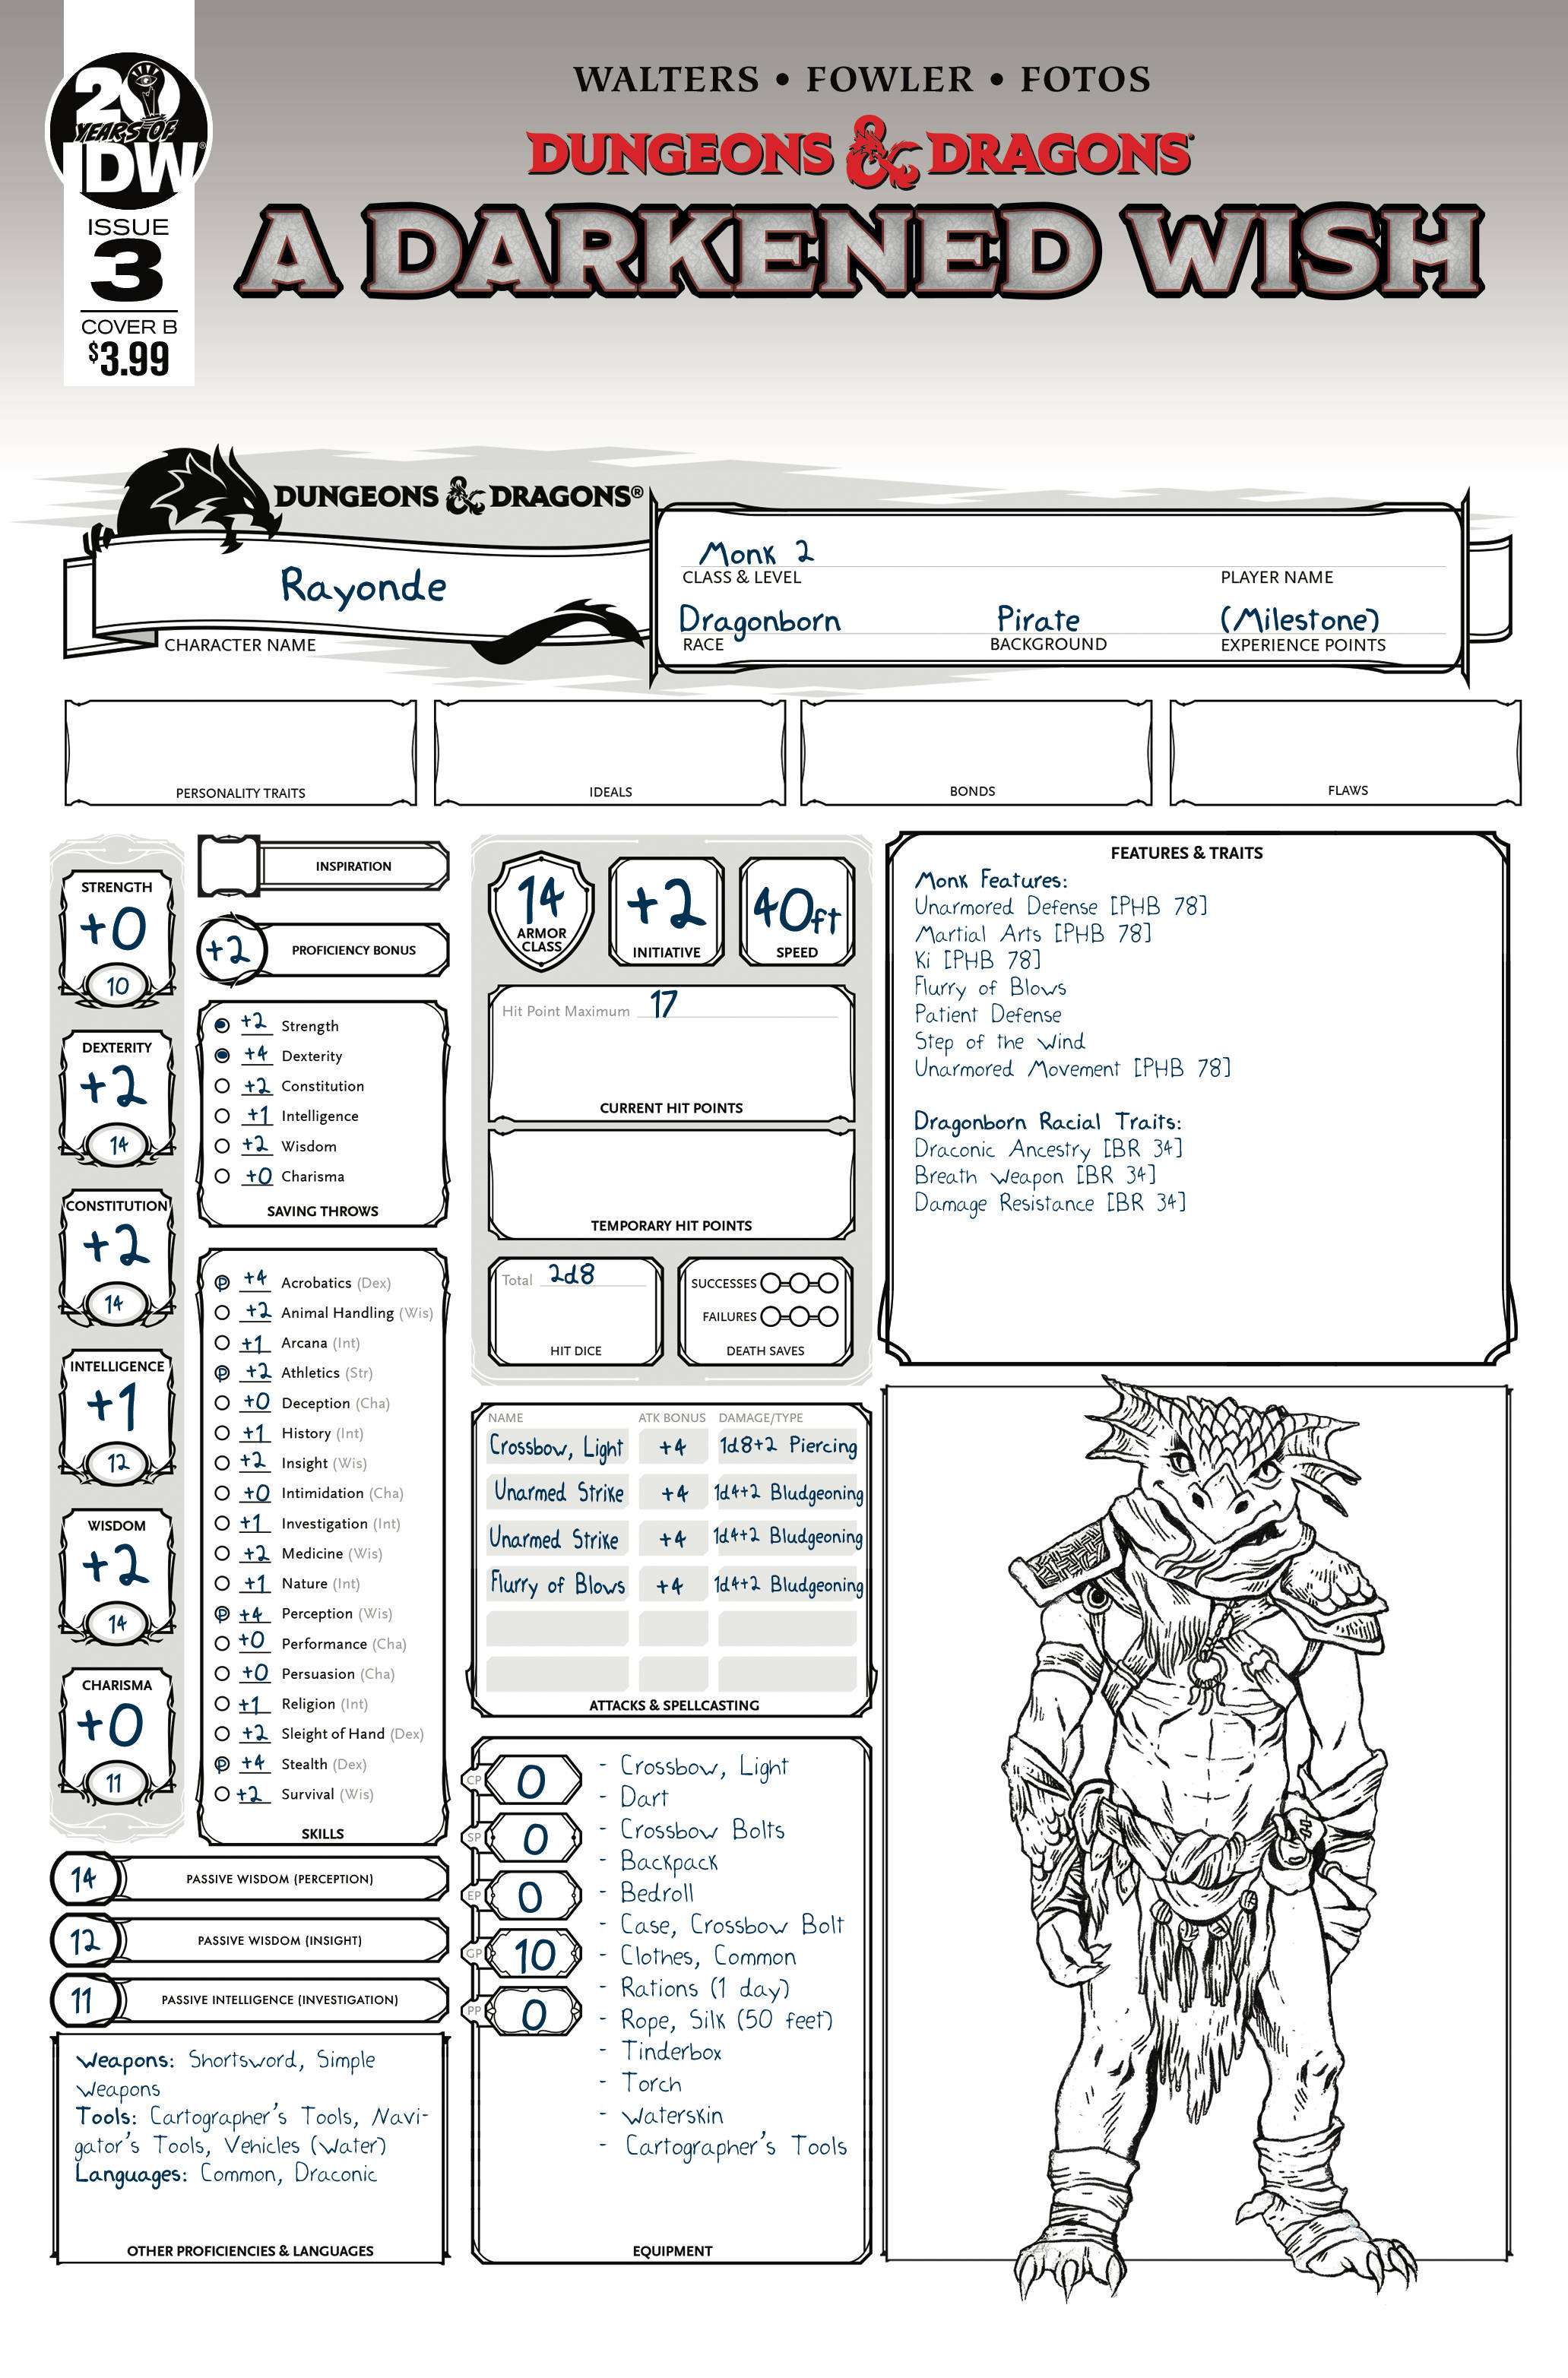 Dungeons & Dragons A Darkened Wish #3 Cover B Character Sheet